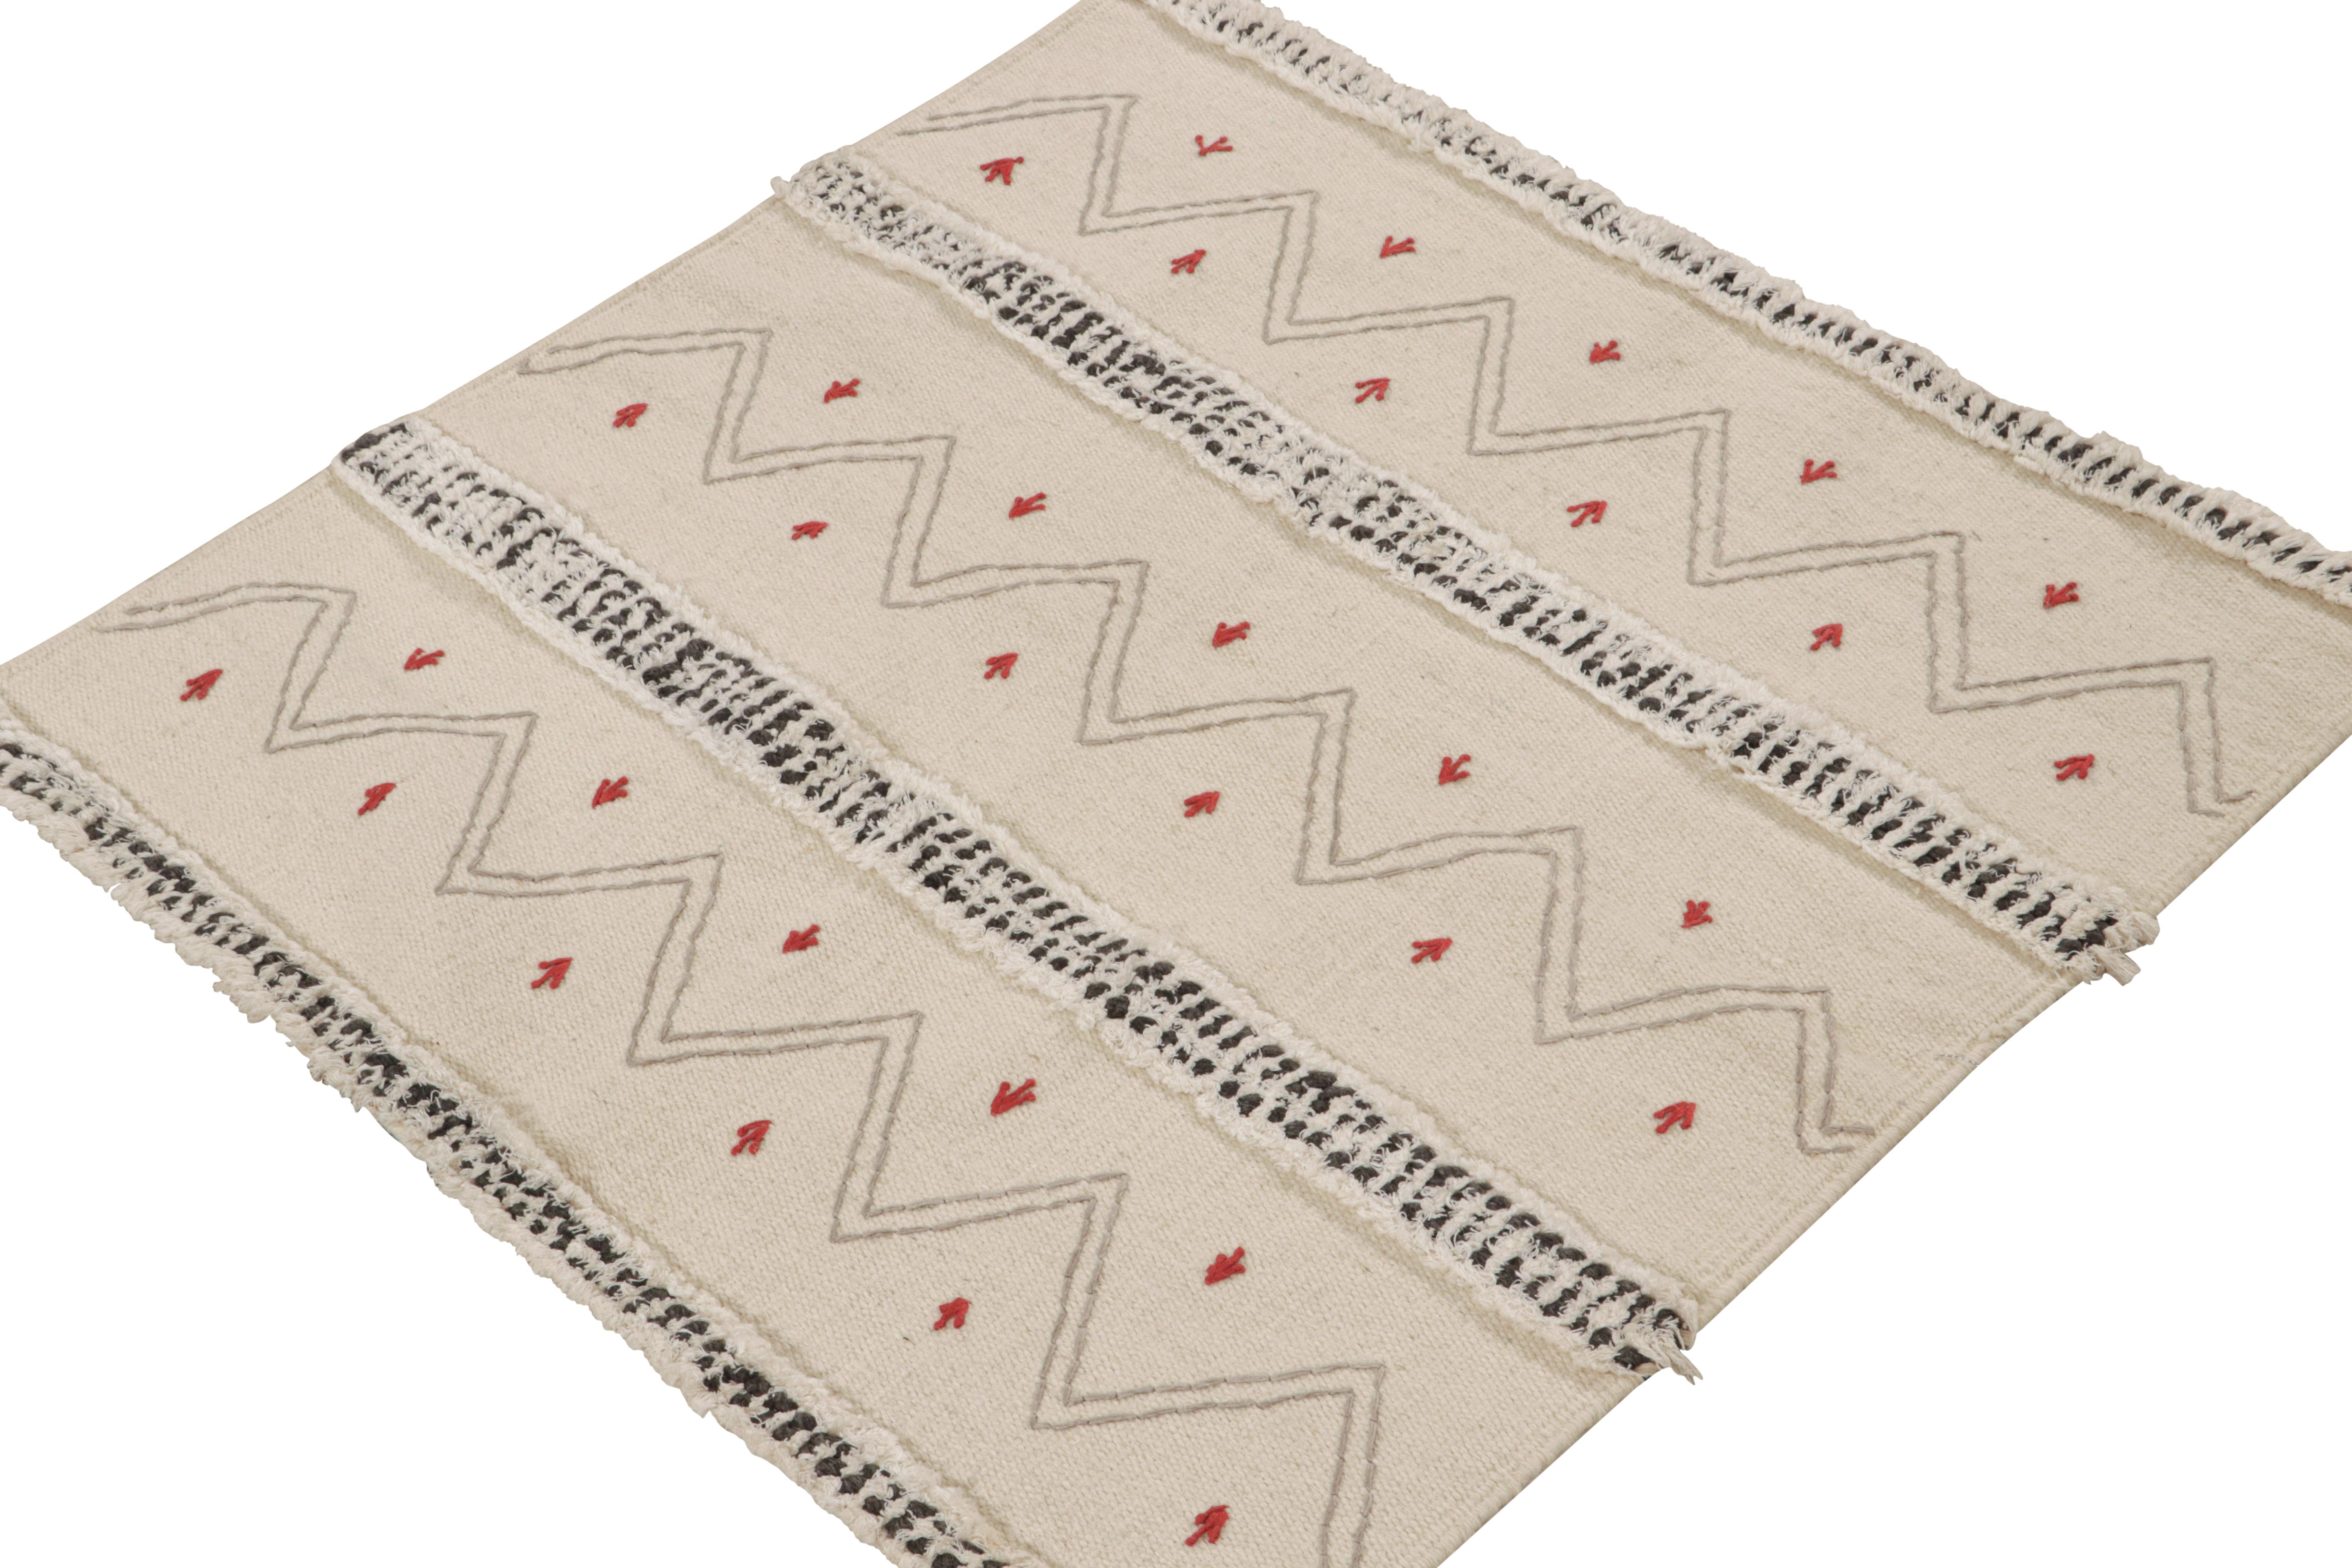 Hand-Knotted Rug & Kilim’s Tribal-Style Kilim in off White, Gray and Red Geometric Patterns For Sale